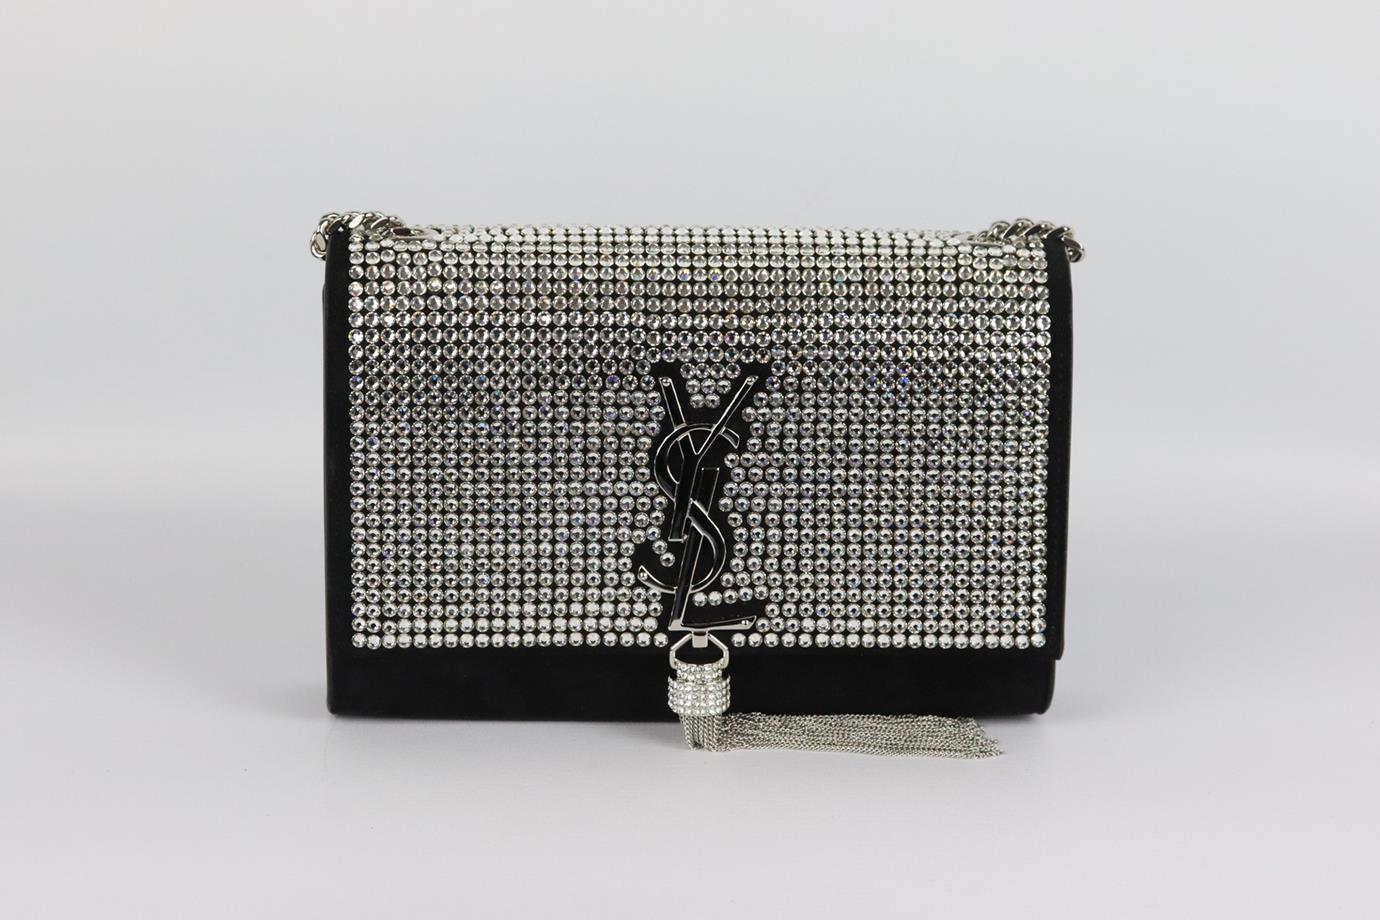 Saint Laurent Kate Monogramme small crystal embellished suede shoulder bag. Made from black suede with crystals on the front flap and finished with the brand’s signature 'YSL' plaque and chain tassel on the front in silver. Black suede. Magnetic